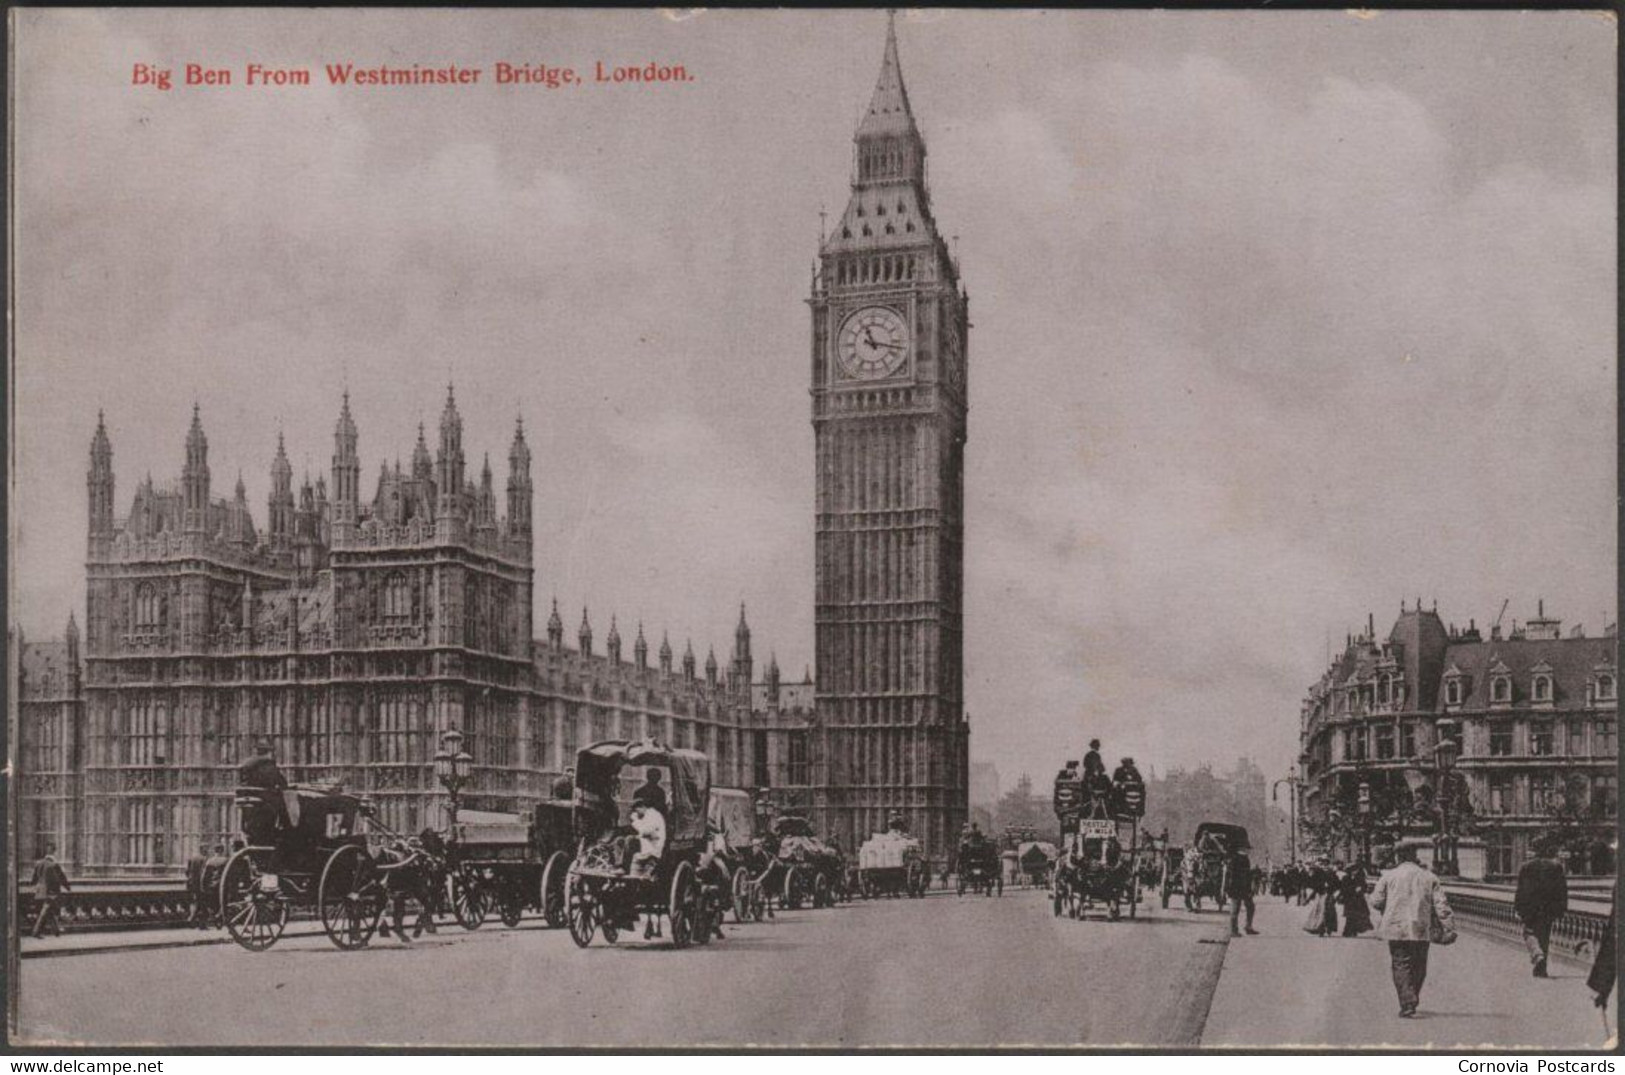 Big Ben From Westminster Bridge, London, C.1905-10 - Sandle Brothers Sample Postcard - Houses Of Parliament